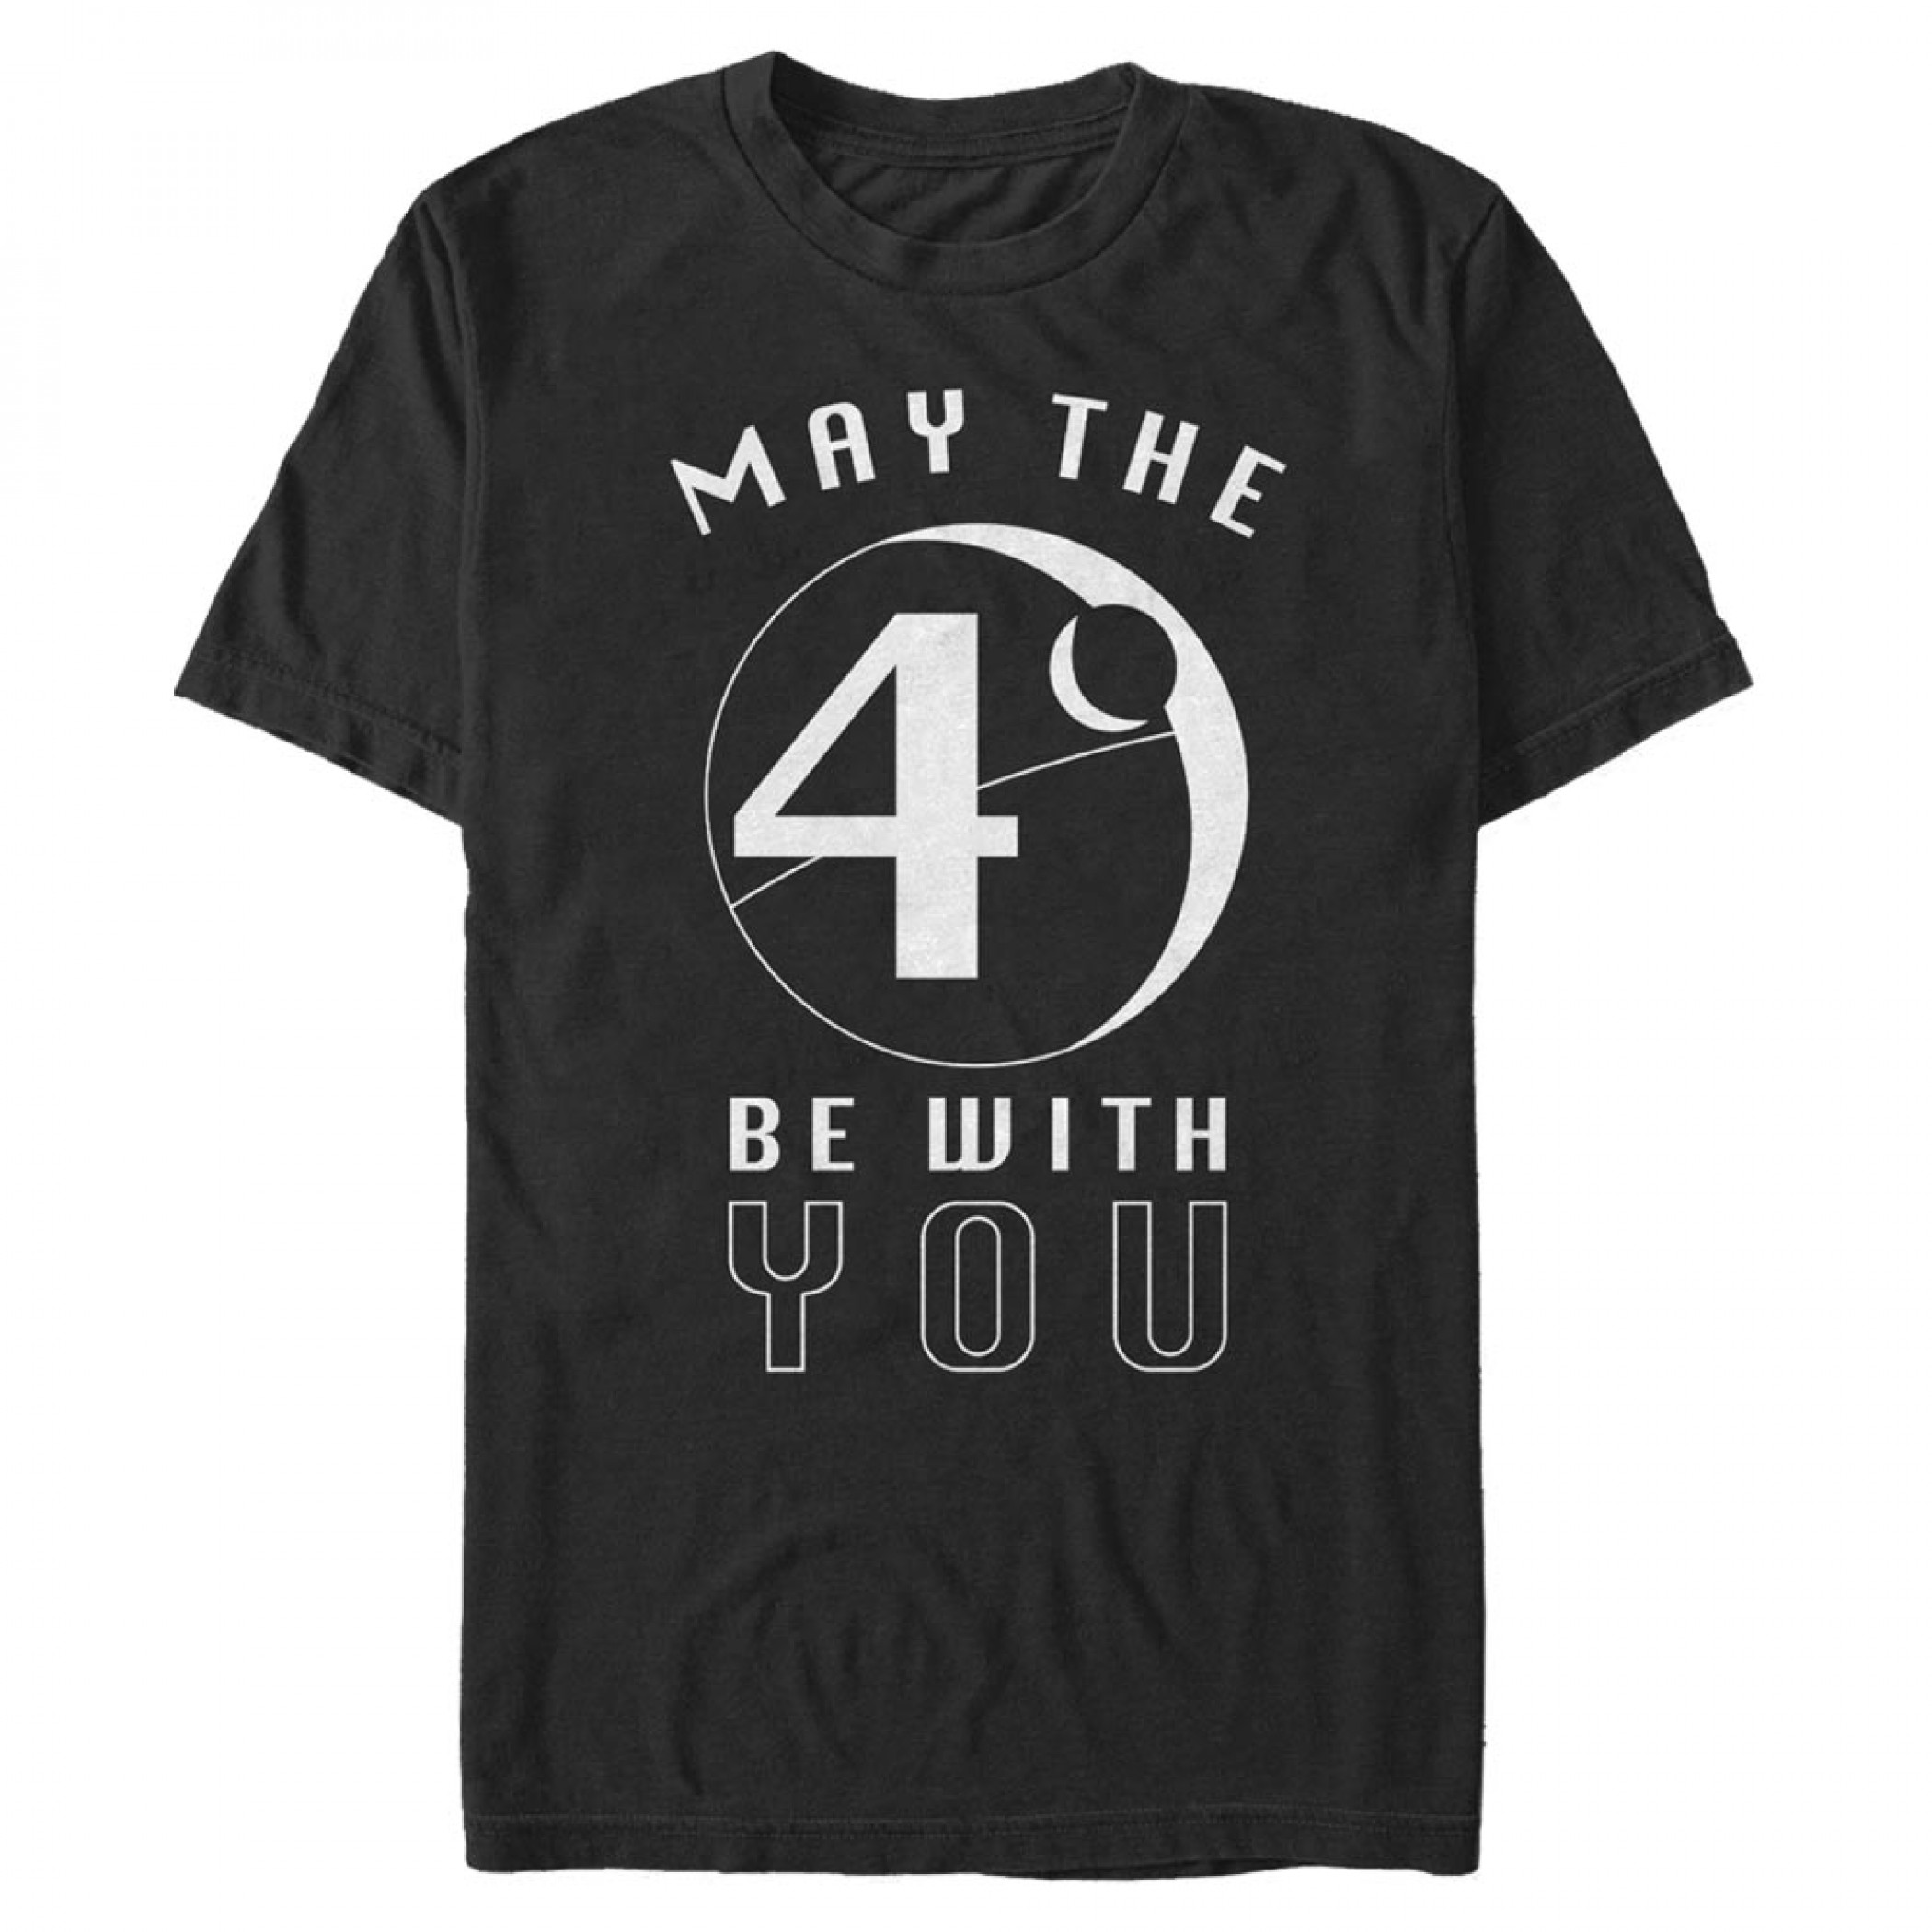 Star Wars May the 4th Be With You Eclipse T-Shirt